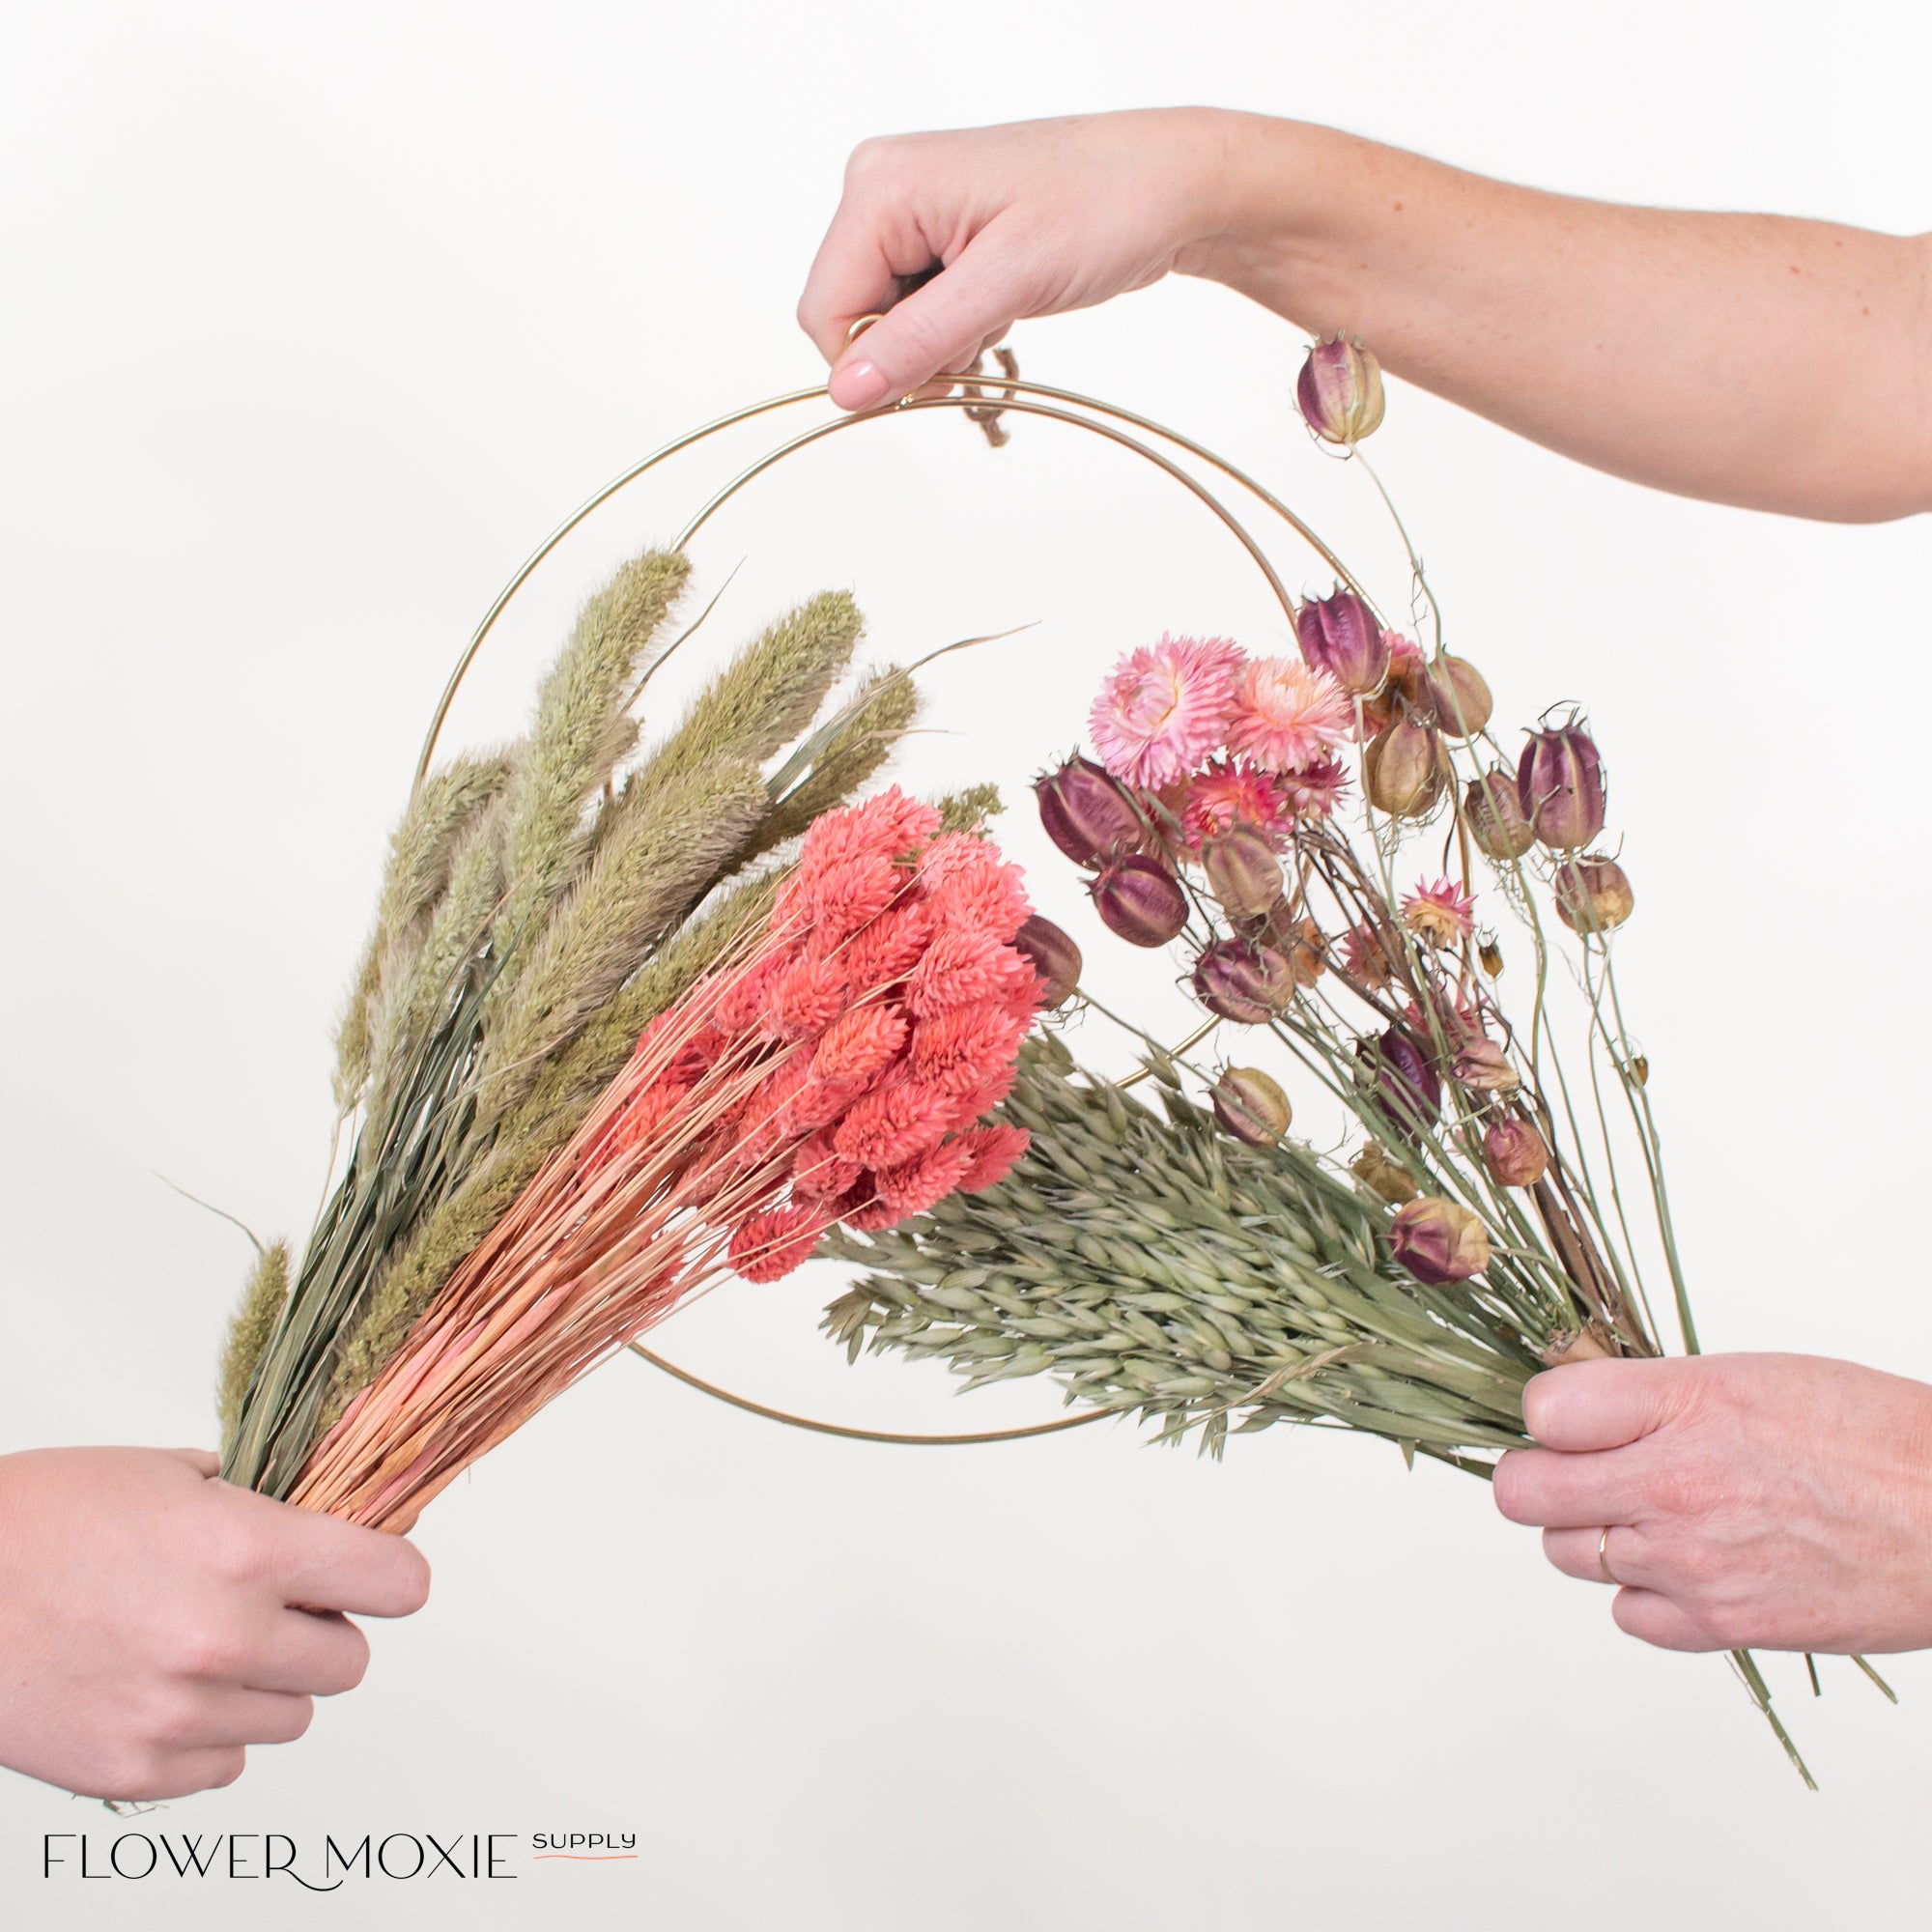 Silk and Dried Floral Arrangements Have Never Been So Easy